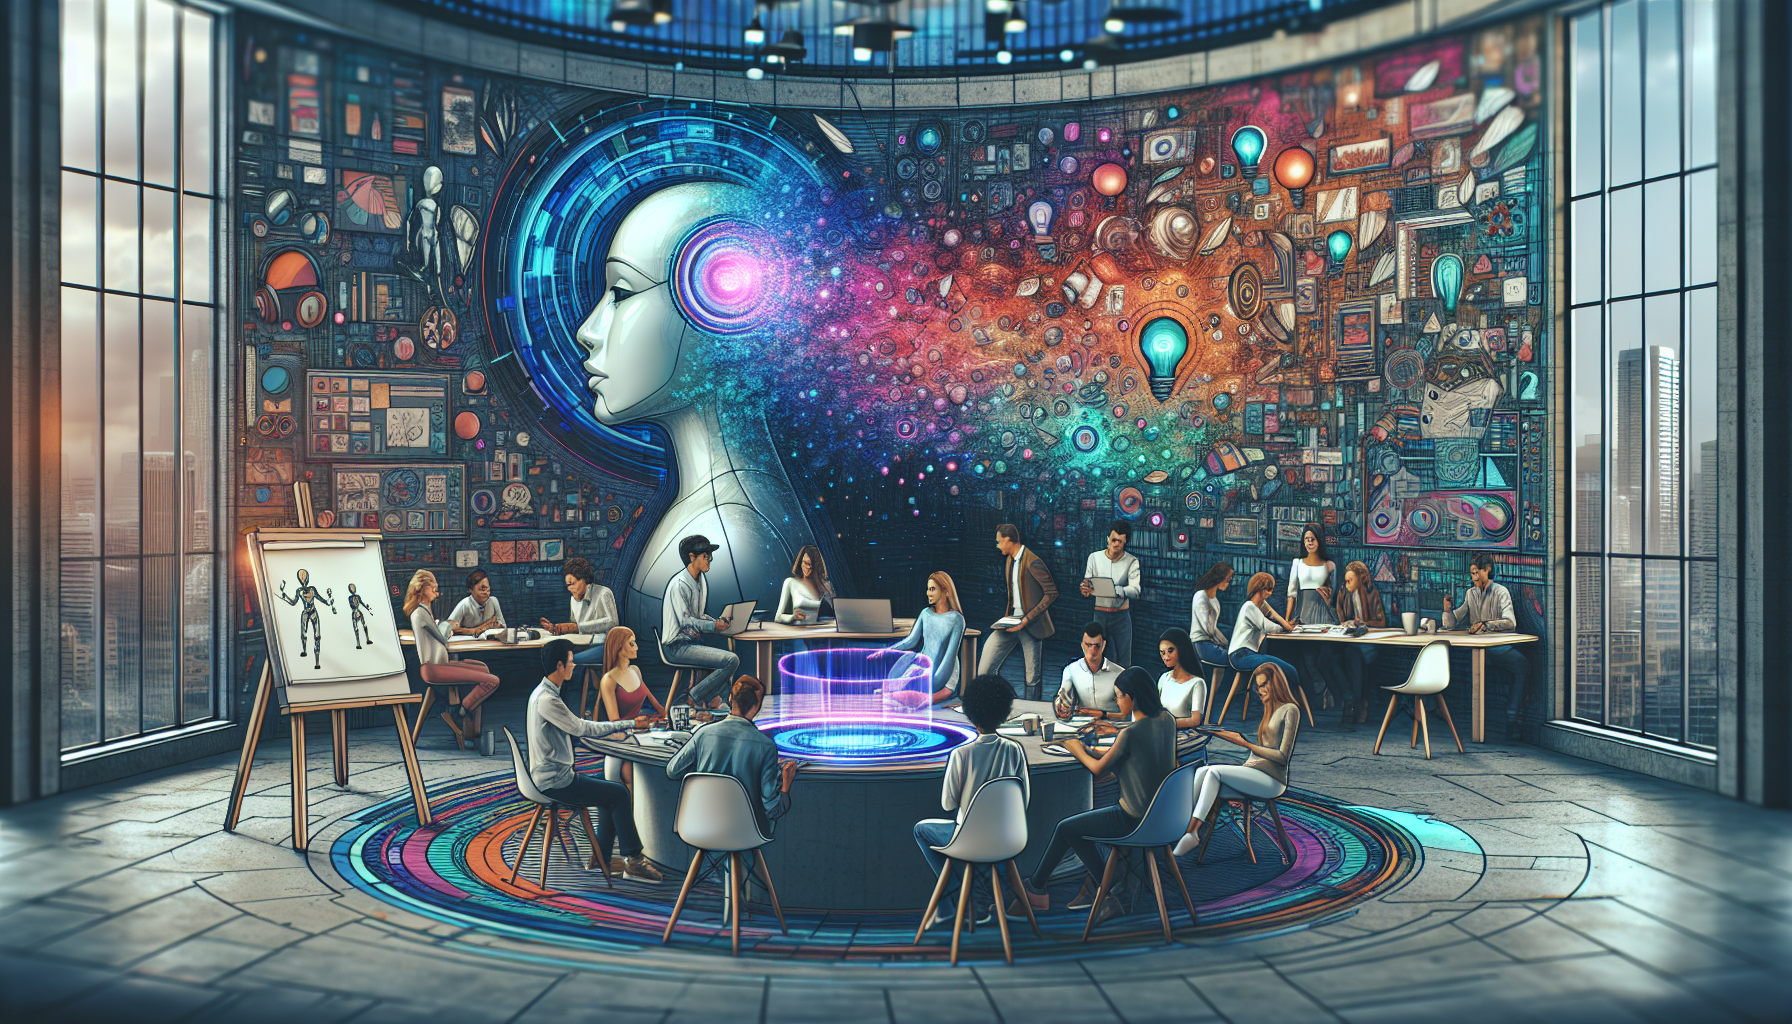 A vibrant, imaginative art studio filled with futuristic technology, where a diverse group of artists and writers are collaboratively brainstorming and sketching ideas. The center of the room features